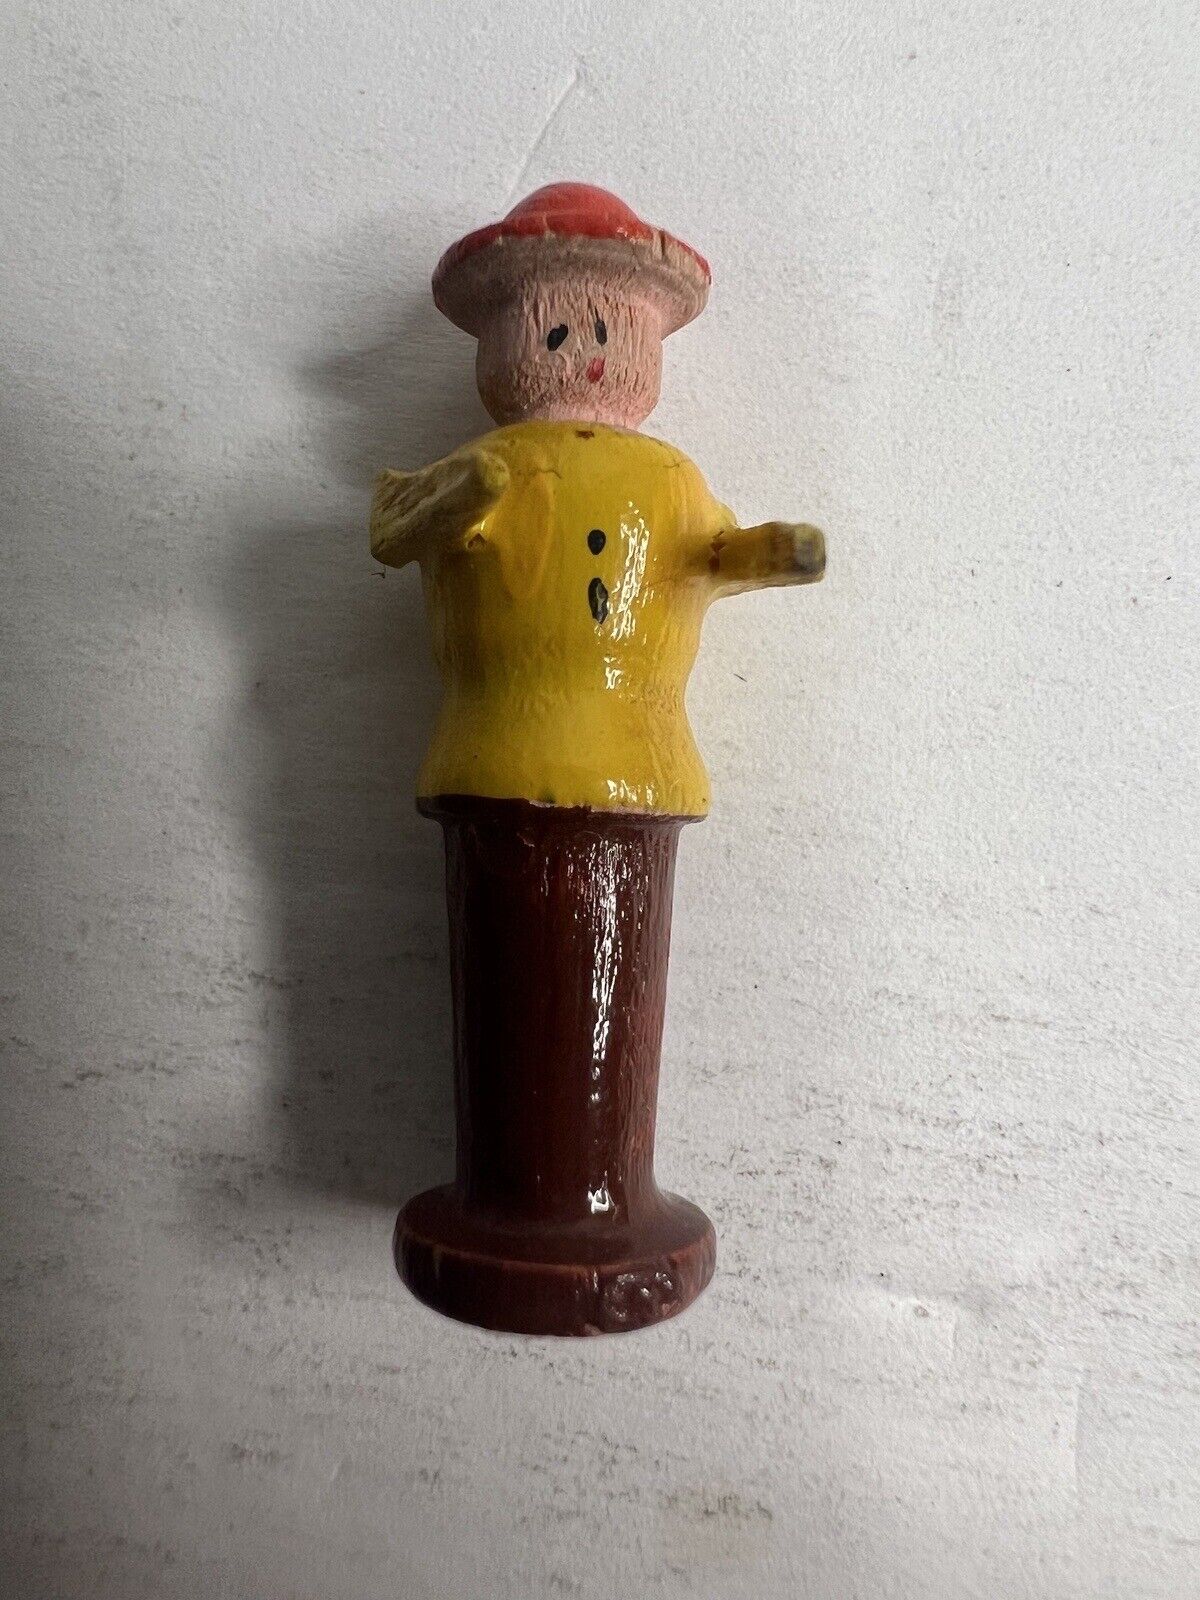 Vintage Wooden Figurine Man With Red Hat Yellow Coat